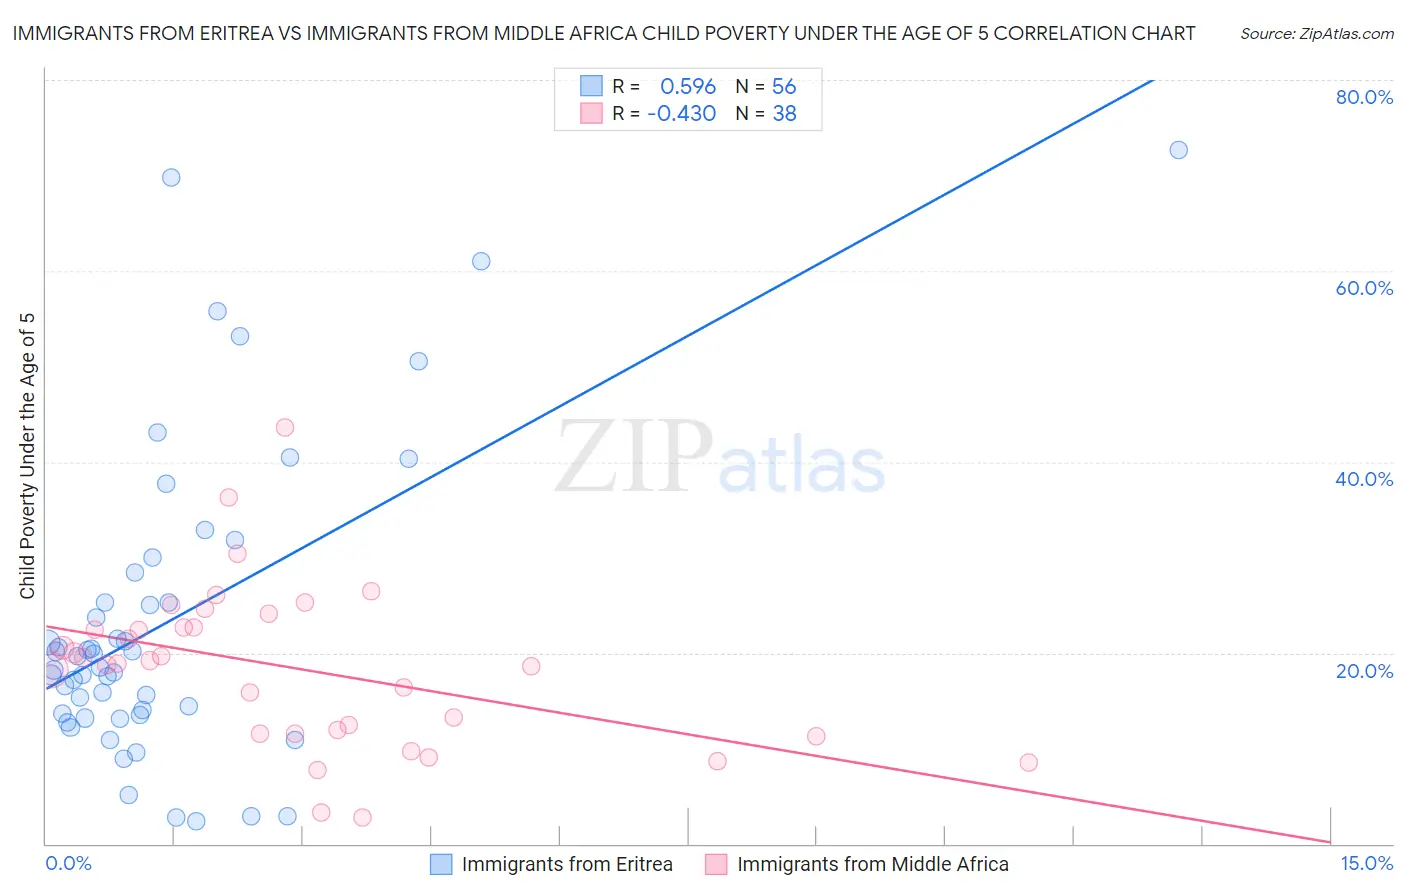 Immigrants from Eritrea vs Immigrants from Middle Africa Child Poverty Under the Age of 5